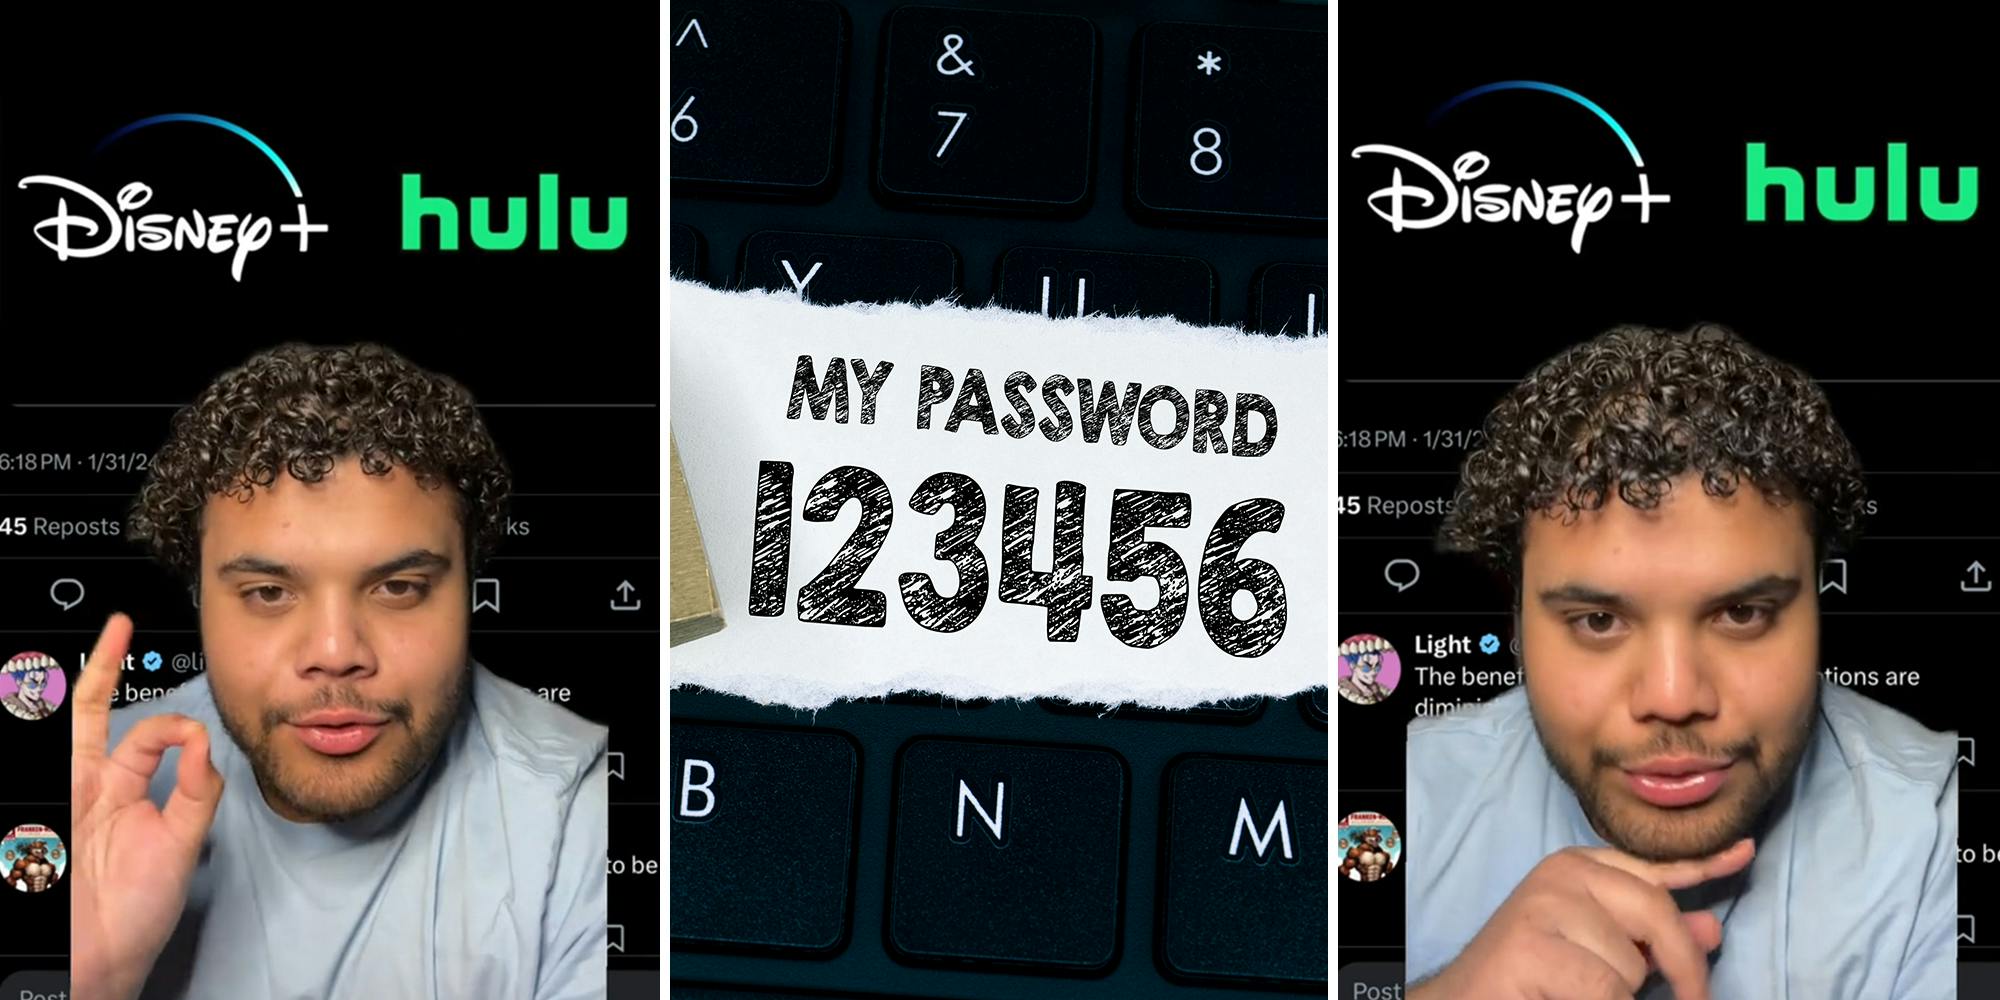 Disney+ and Hulu to ban password sharing. Users say they’re going back on a promise